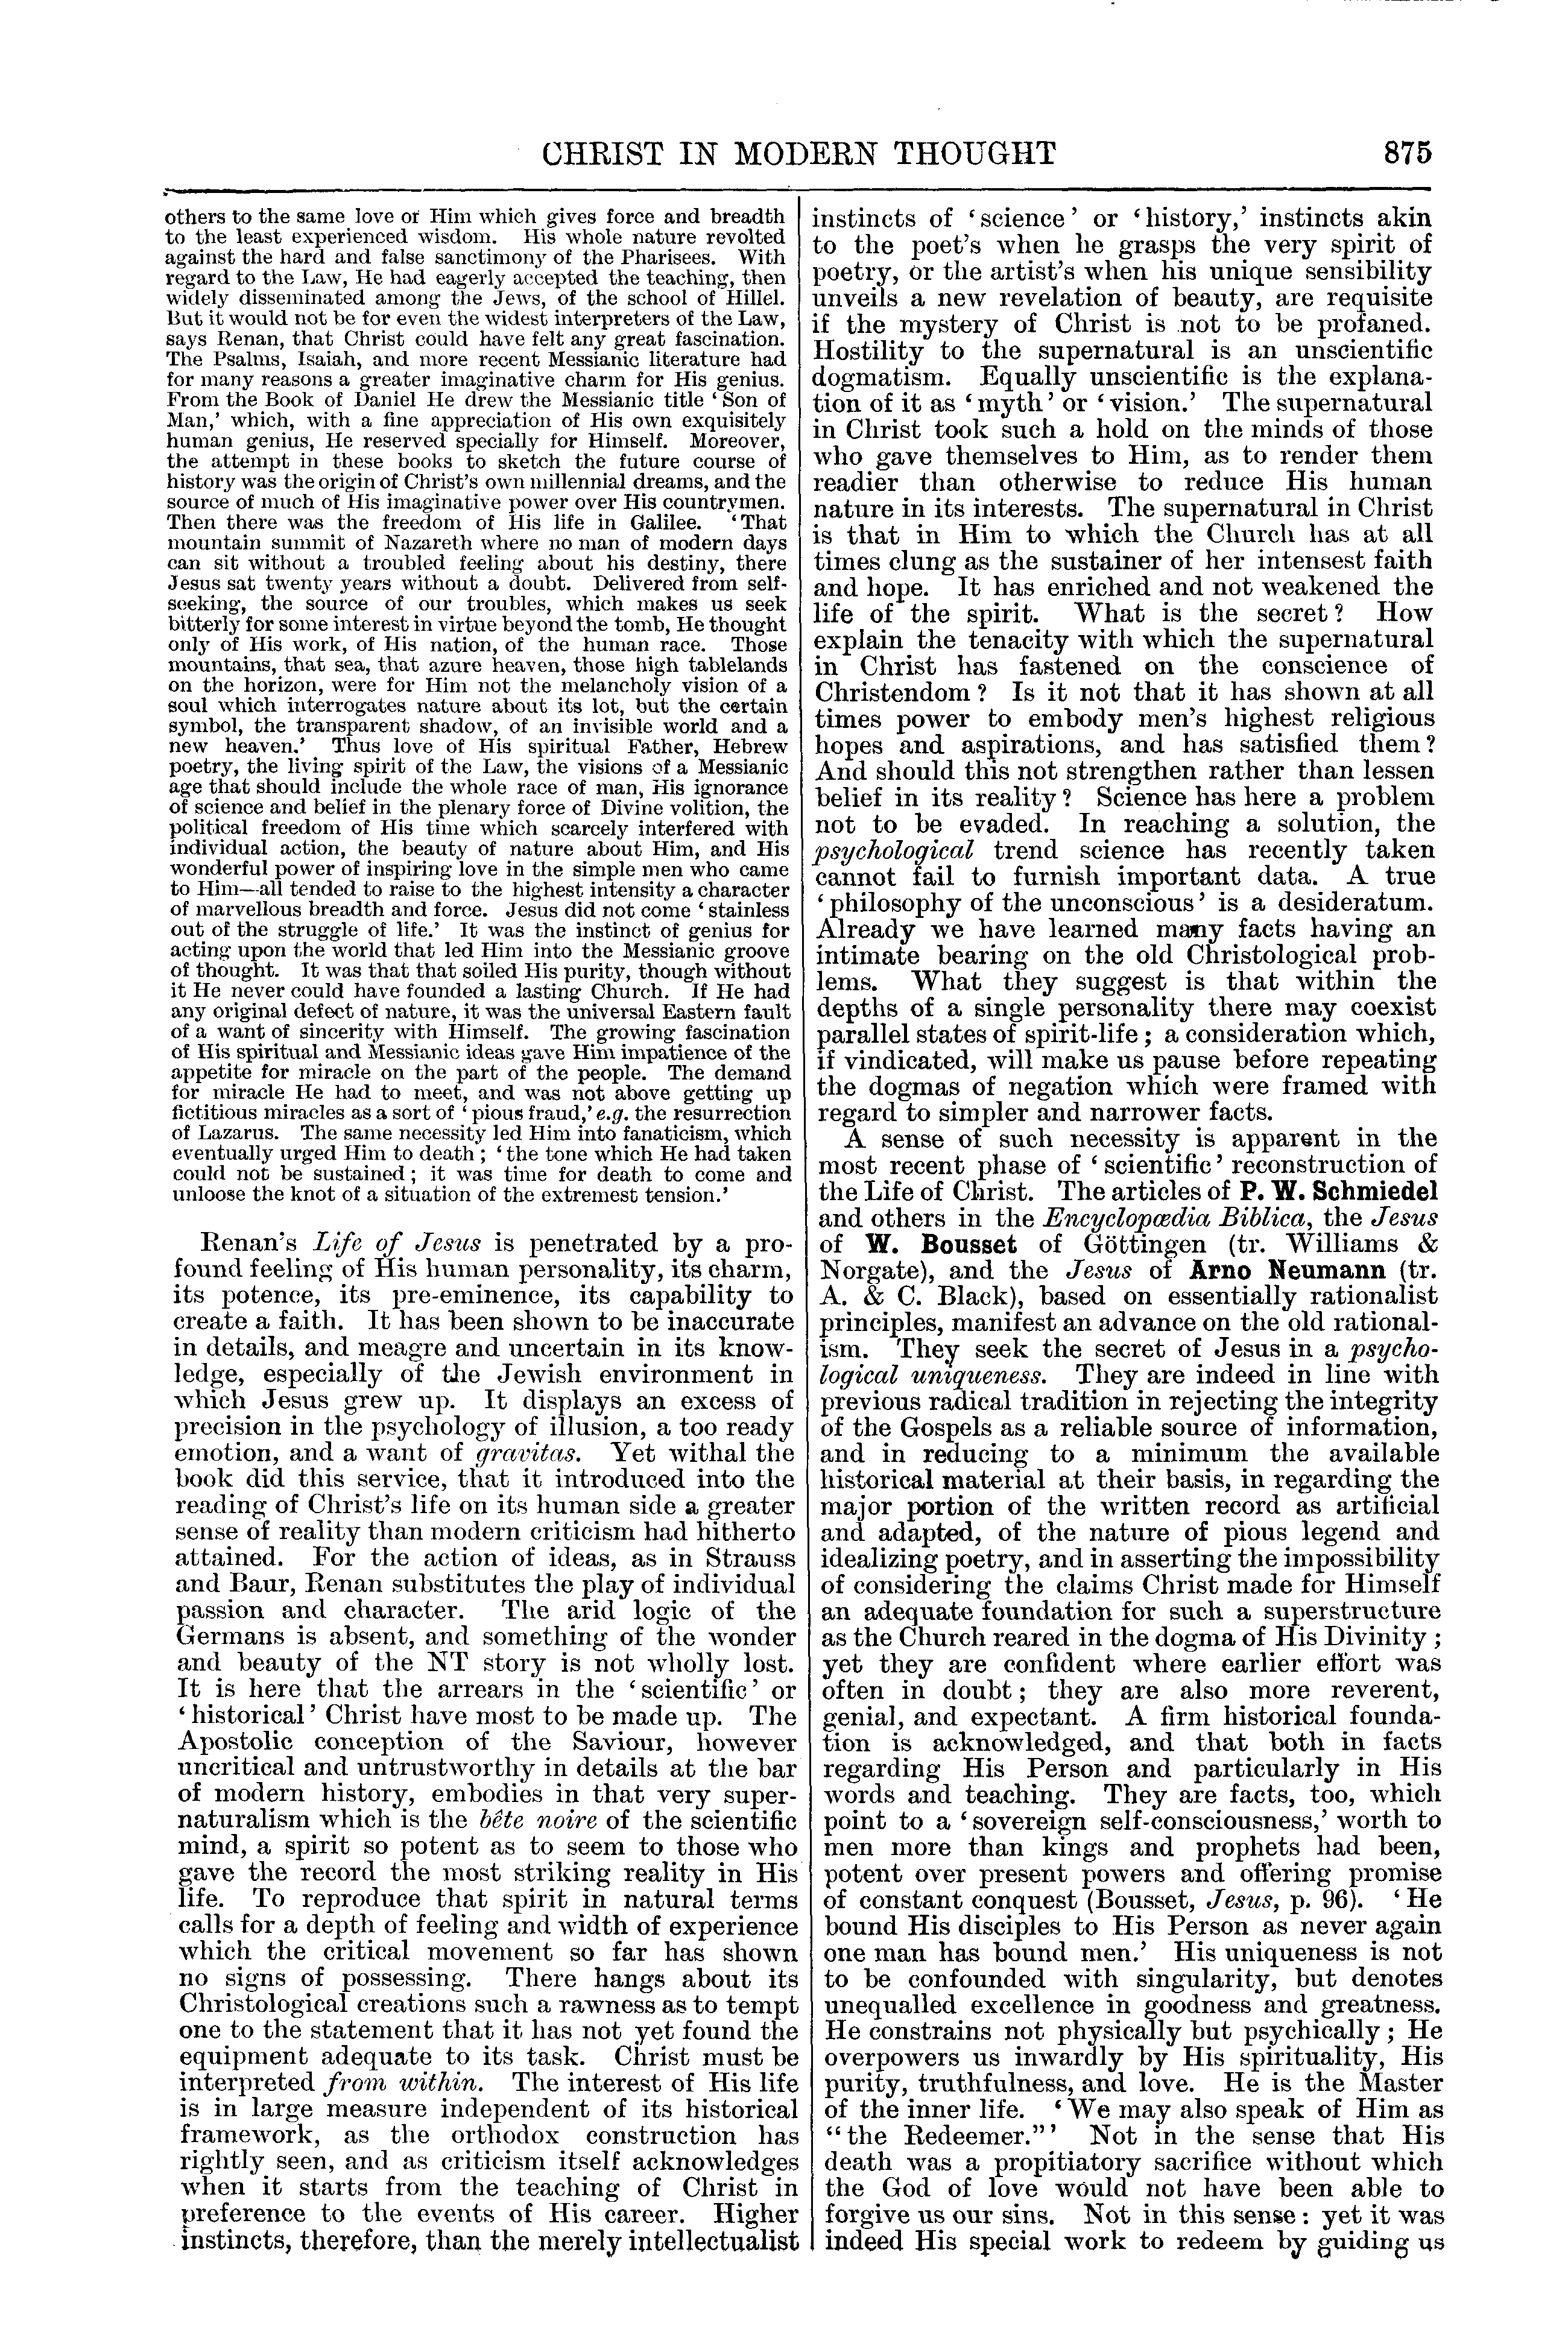 Image of page 875